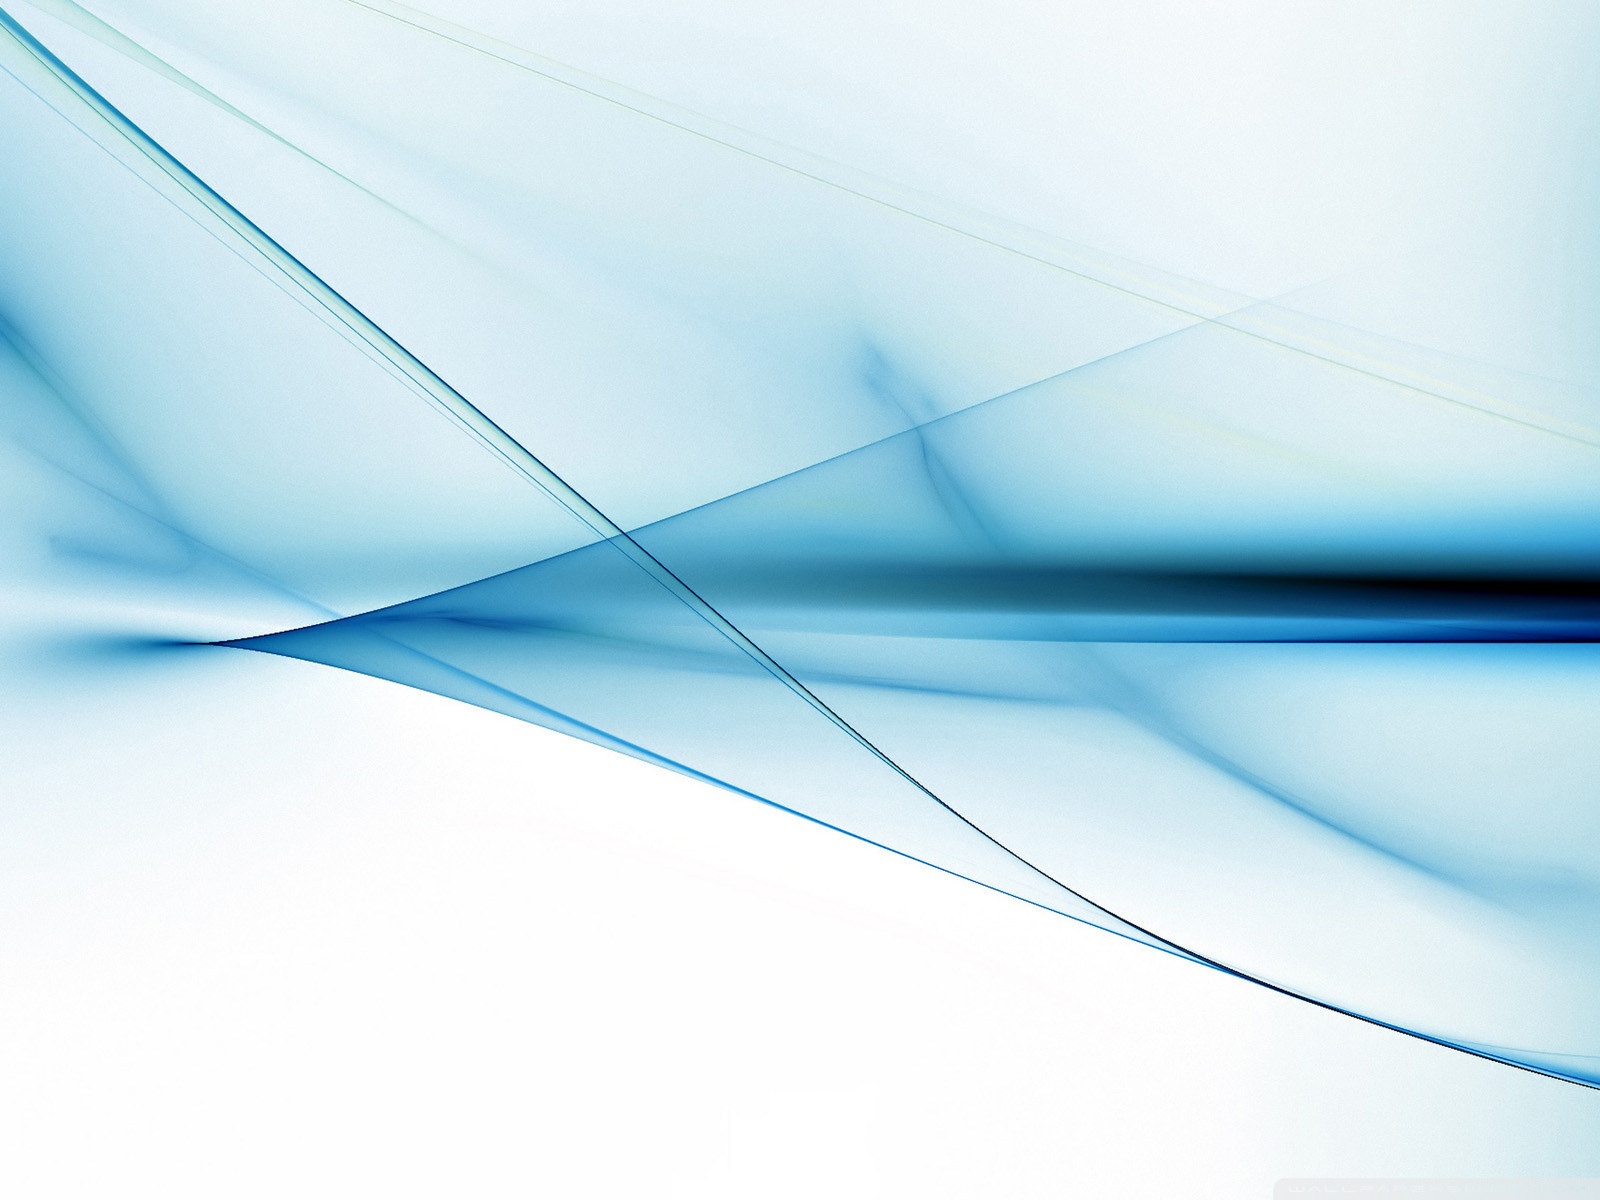 Blue Line Hd Wallpapers